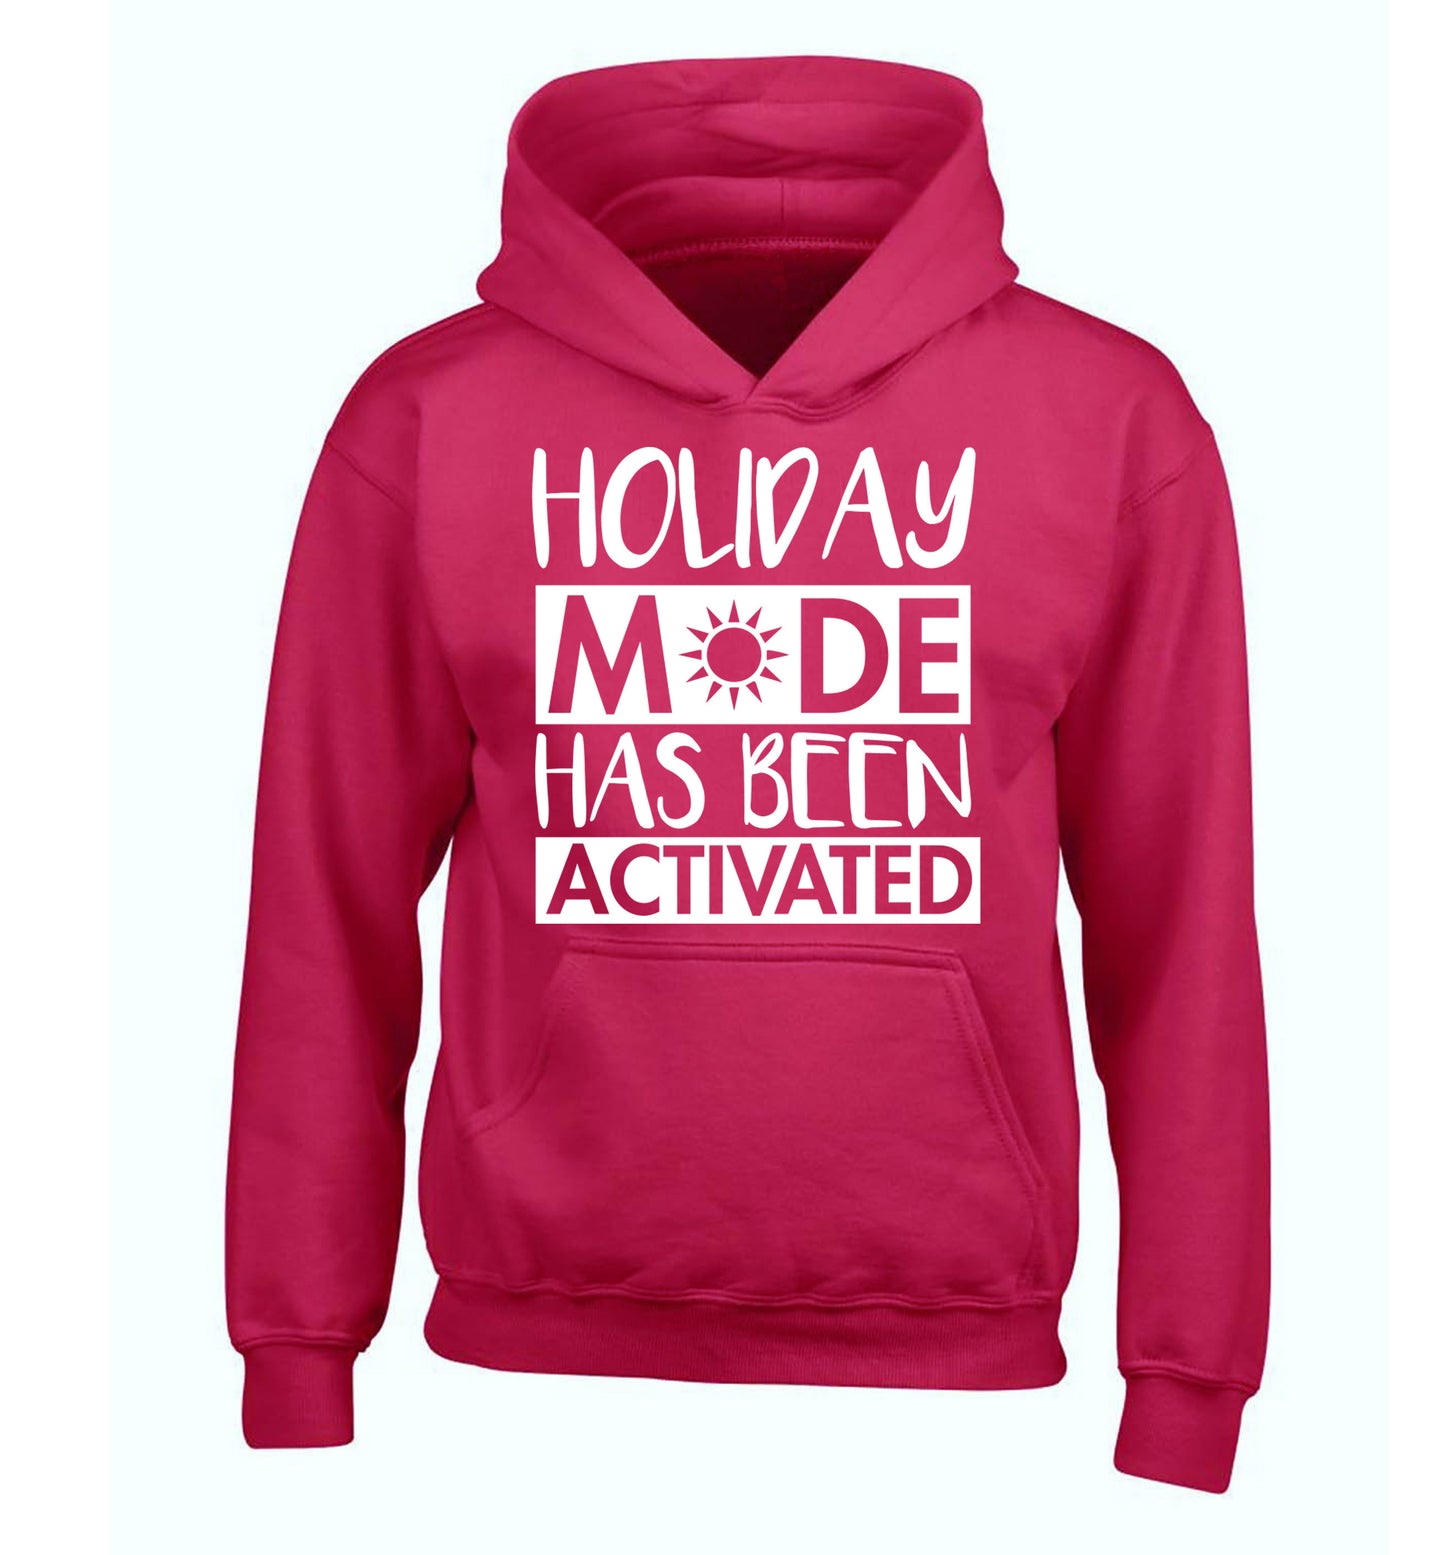 Holiday mode has been activated children's pink hoodie 12-14 Years